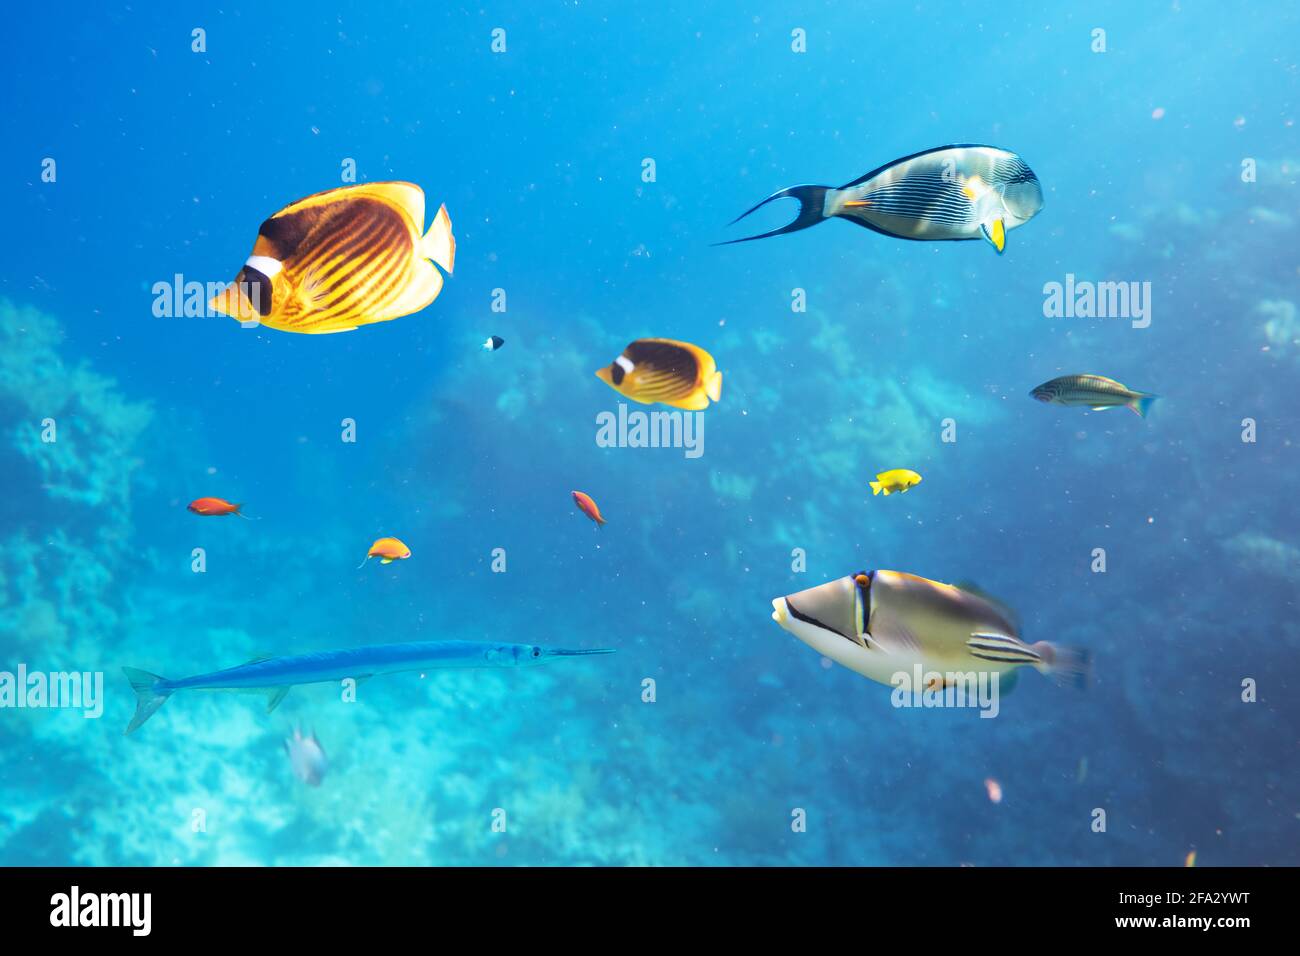 Different tropical fish on a coral reef in the Red Sea Stock Photo